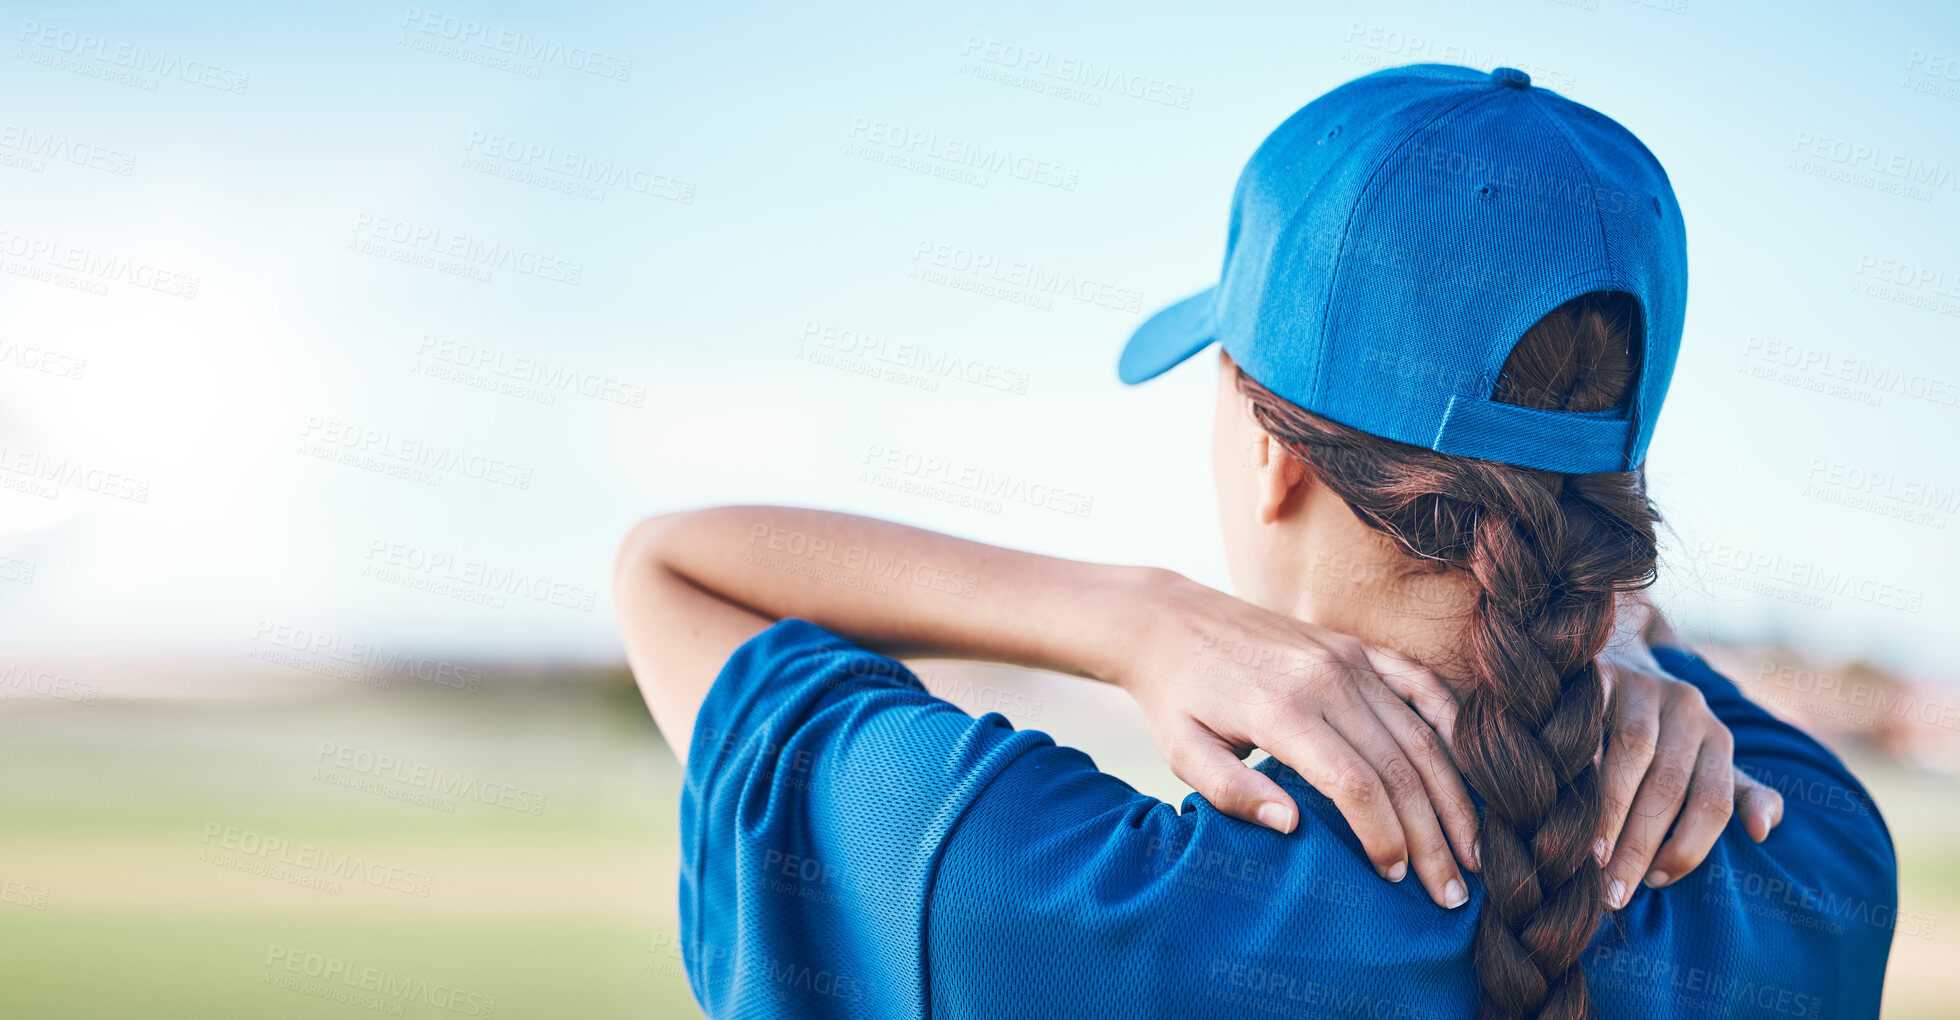 Buy stock photo Spine injury, back or sports person with anatomy pain from baseball challenge, workout mistake or exercise risk. Medical emergency, training accident or athlete with fibromyalgia, backache or problem